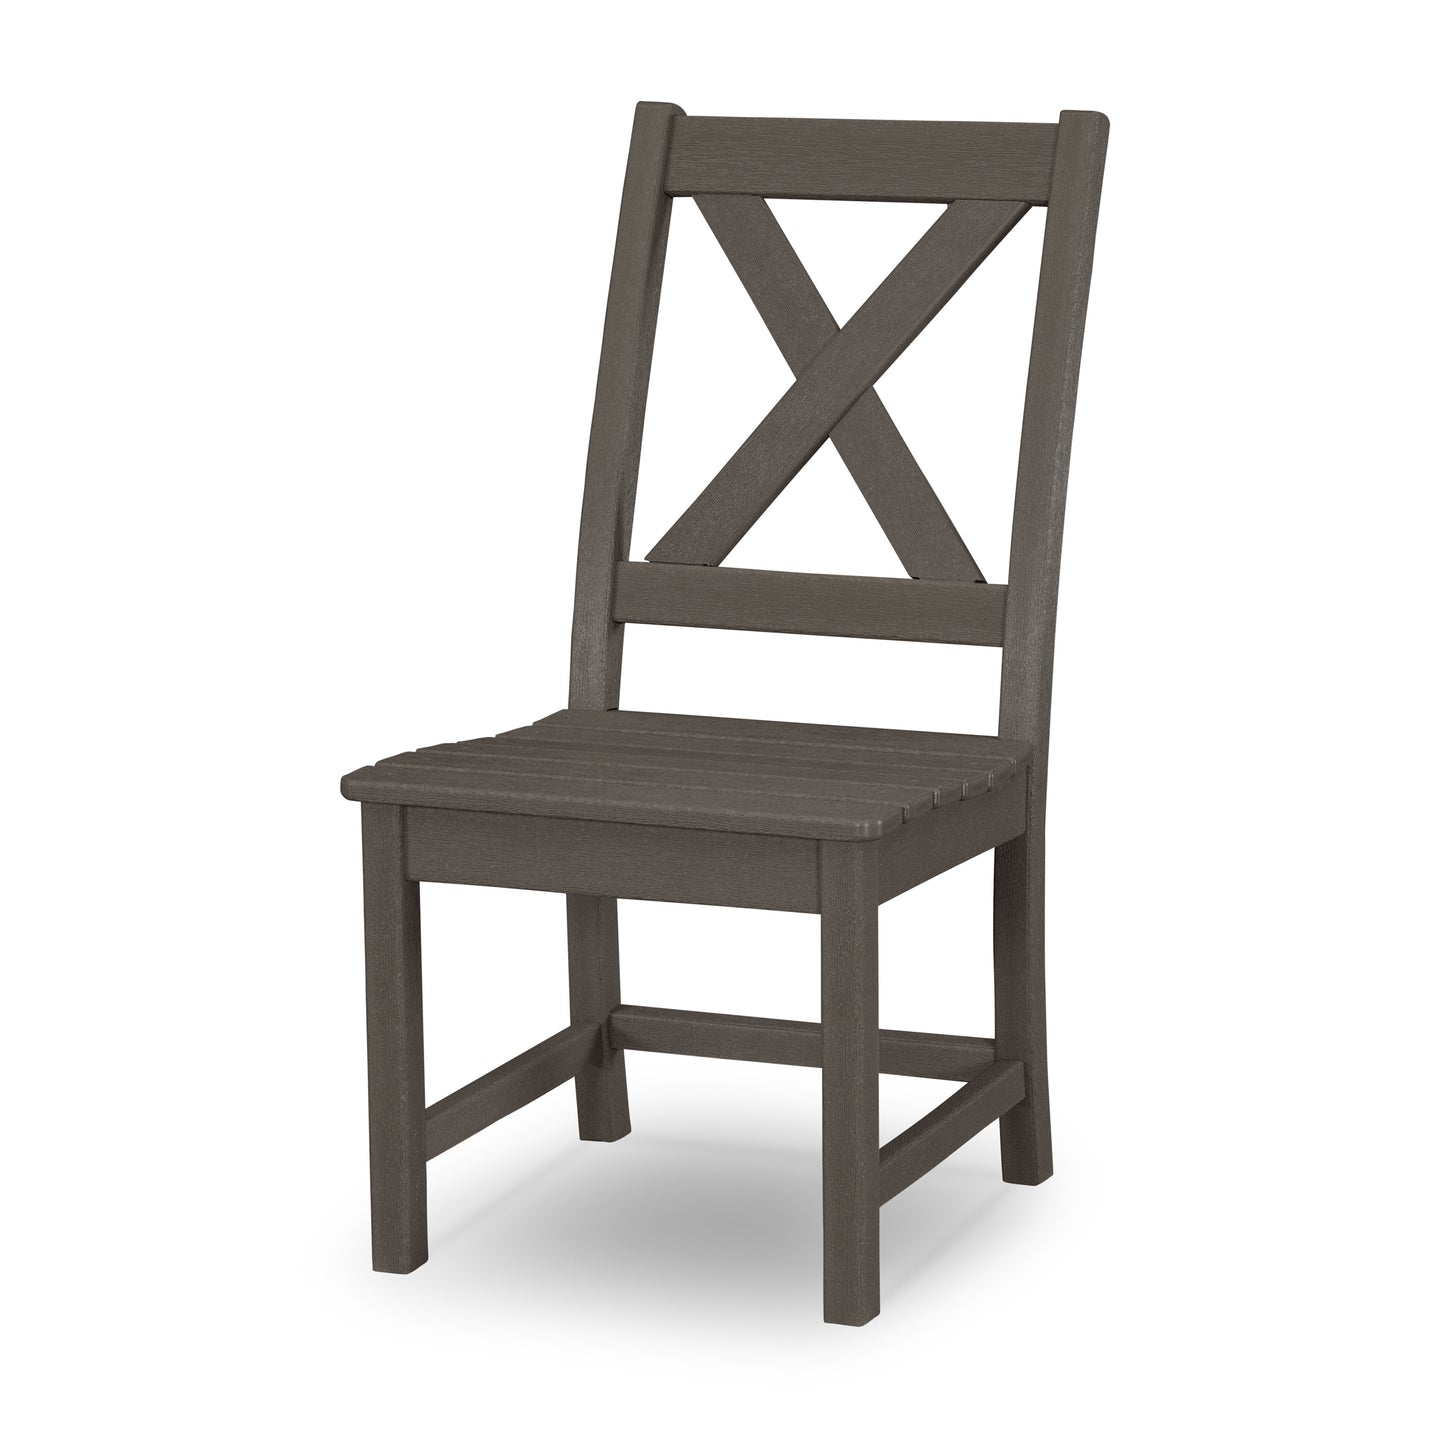 Braxton Dining Side Chair Vintage Finish